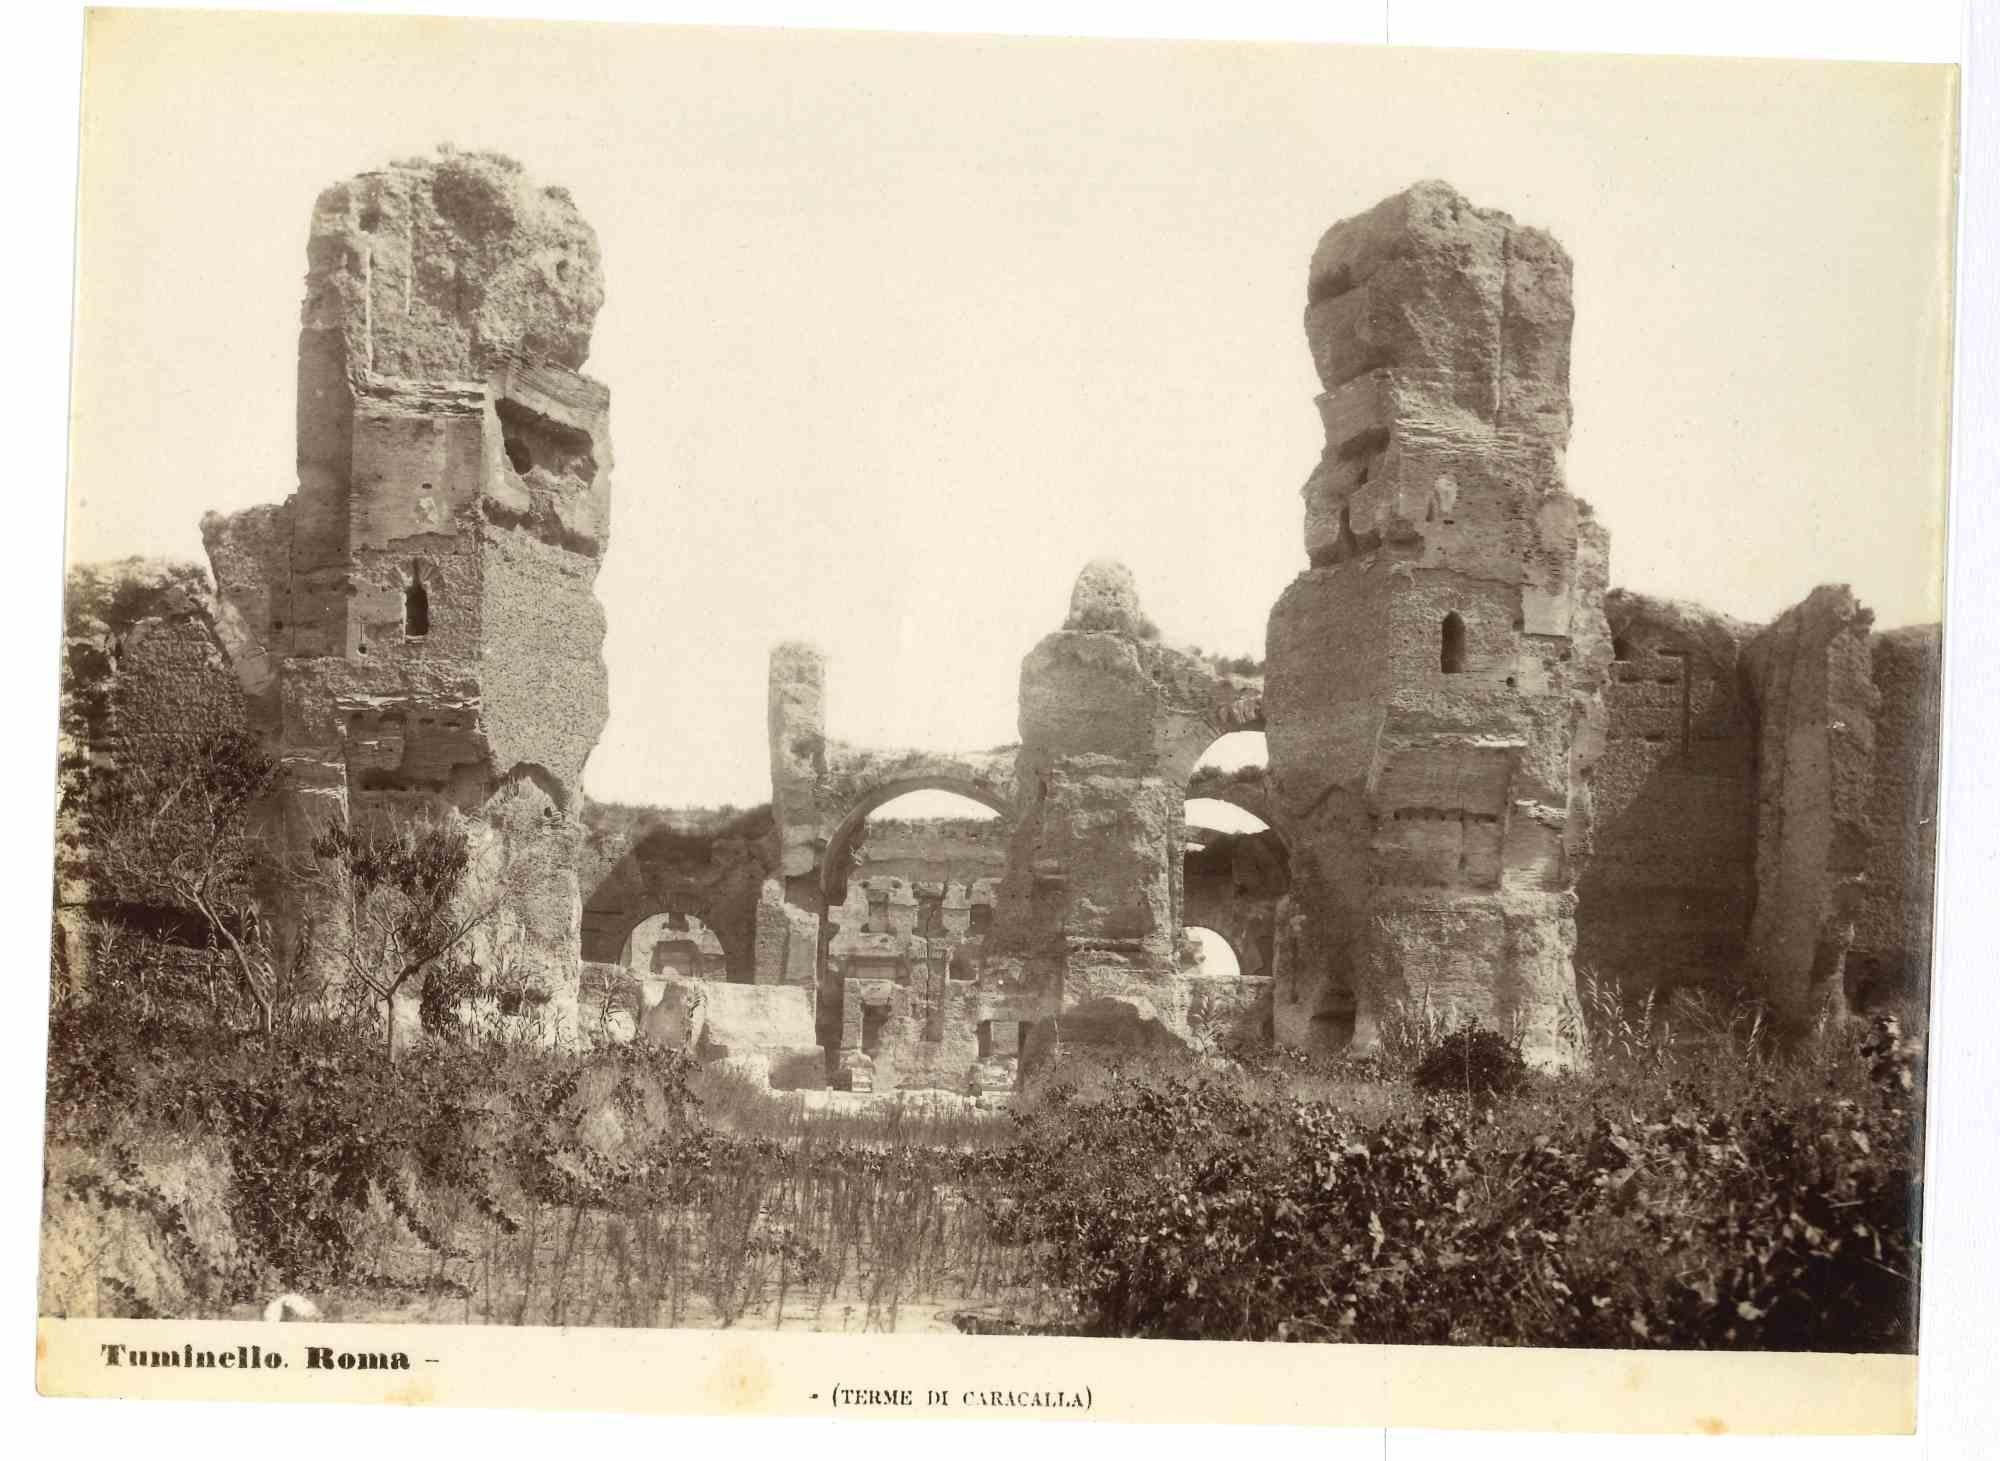 Baths of Caracalla is a vintage print in salt silver realized by Ludovico Tuminello in the early 20th Century.

Titled on the lower.

Good conditions.